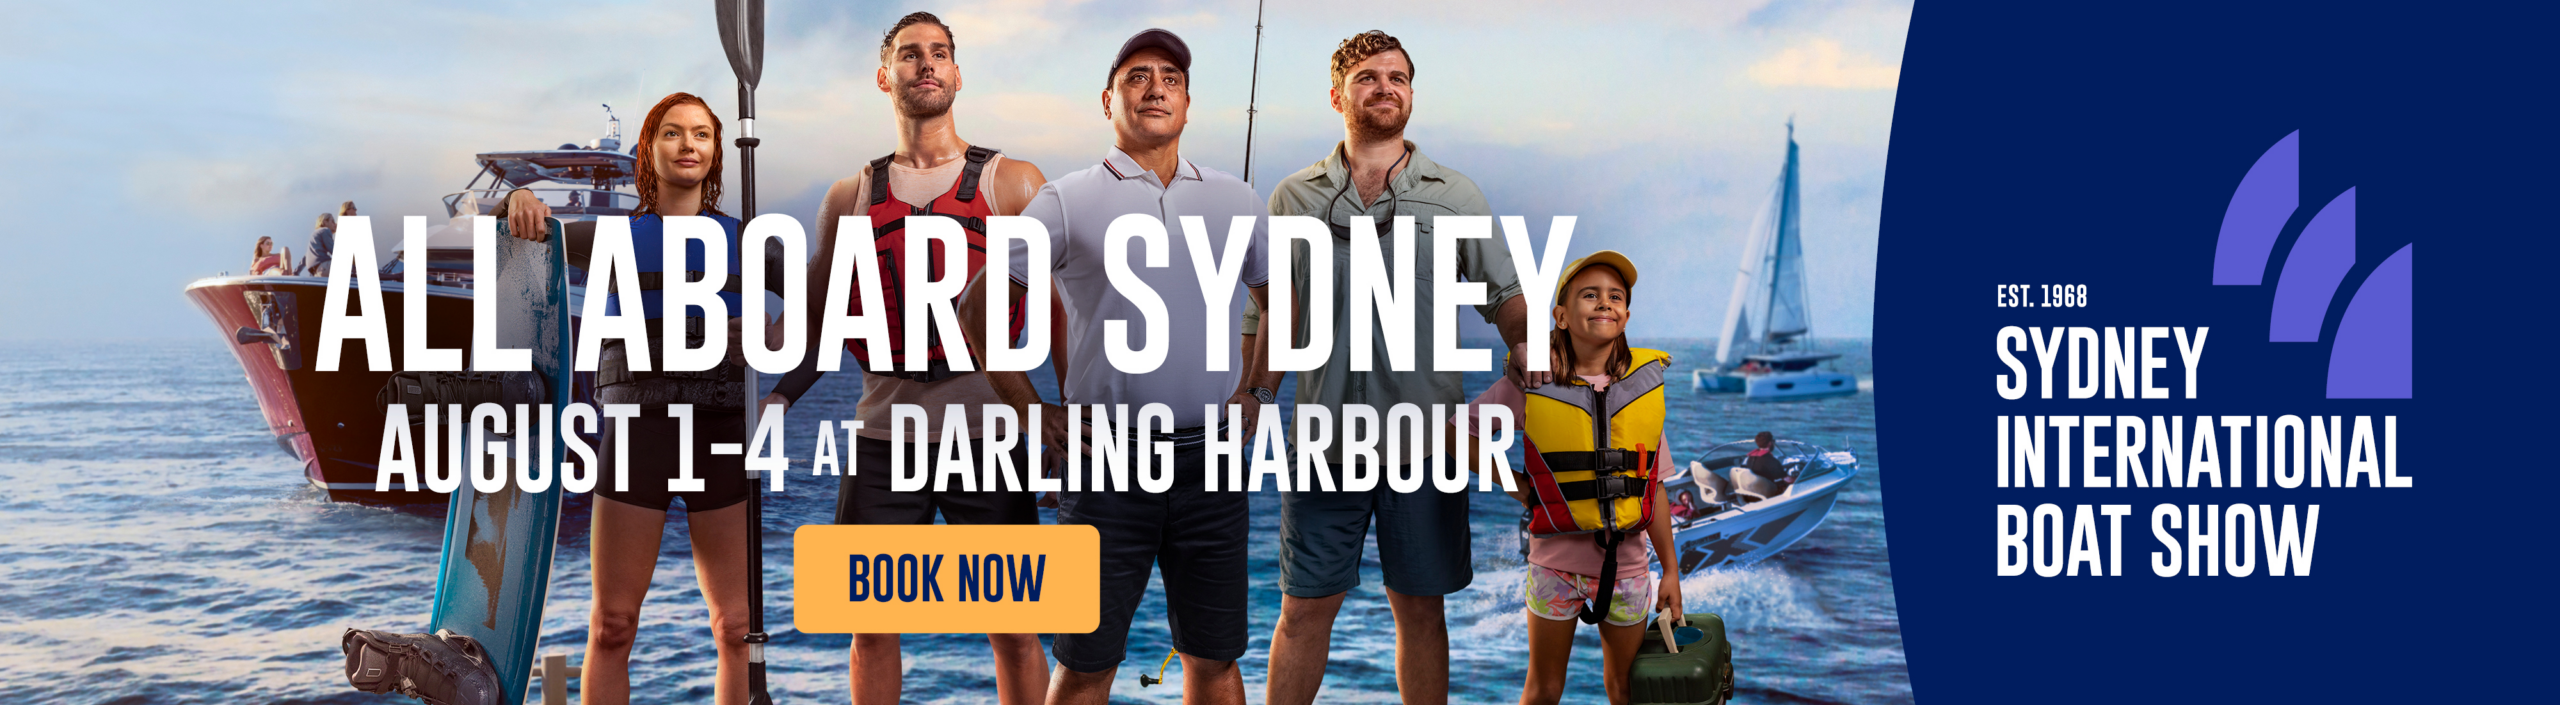 Sydney International Boat Show is coming to ICC Sydney on 1 to 4 August 2024.